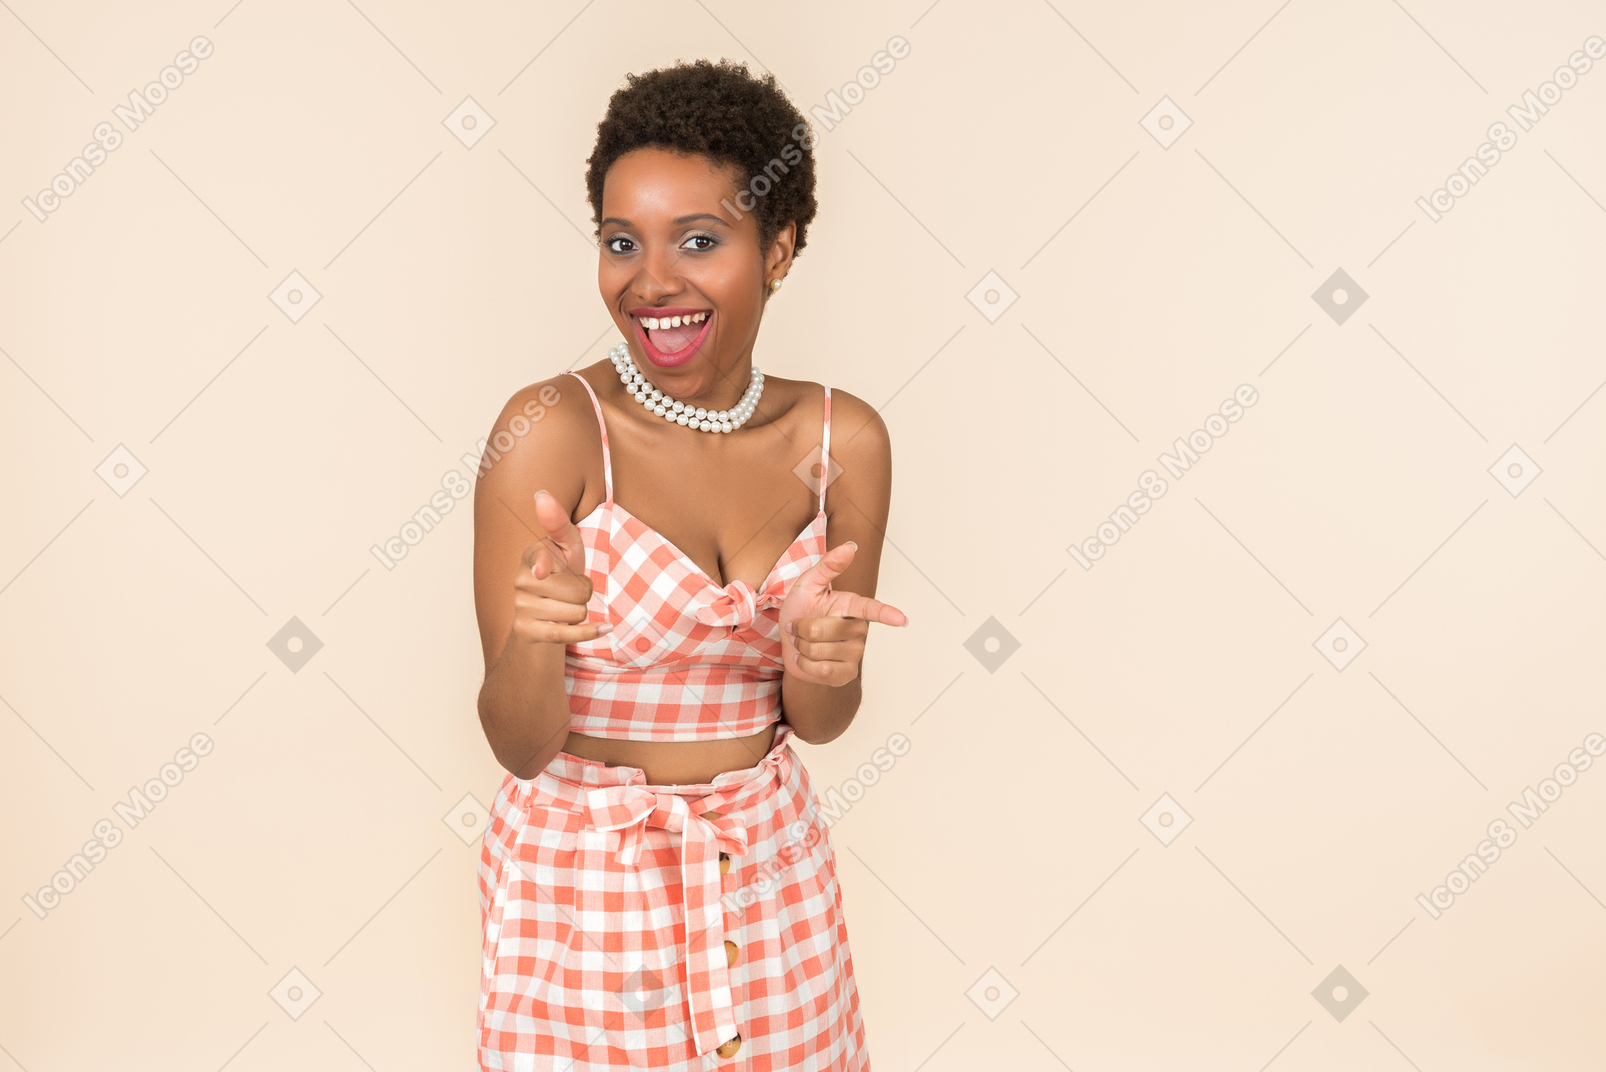 Young black short-haired woman in a checkered top and a skirt, posing against a plain peachy background